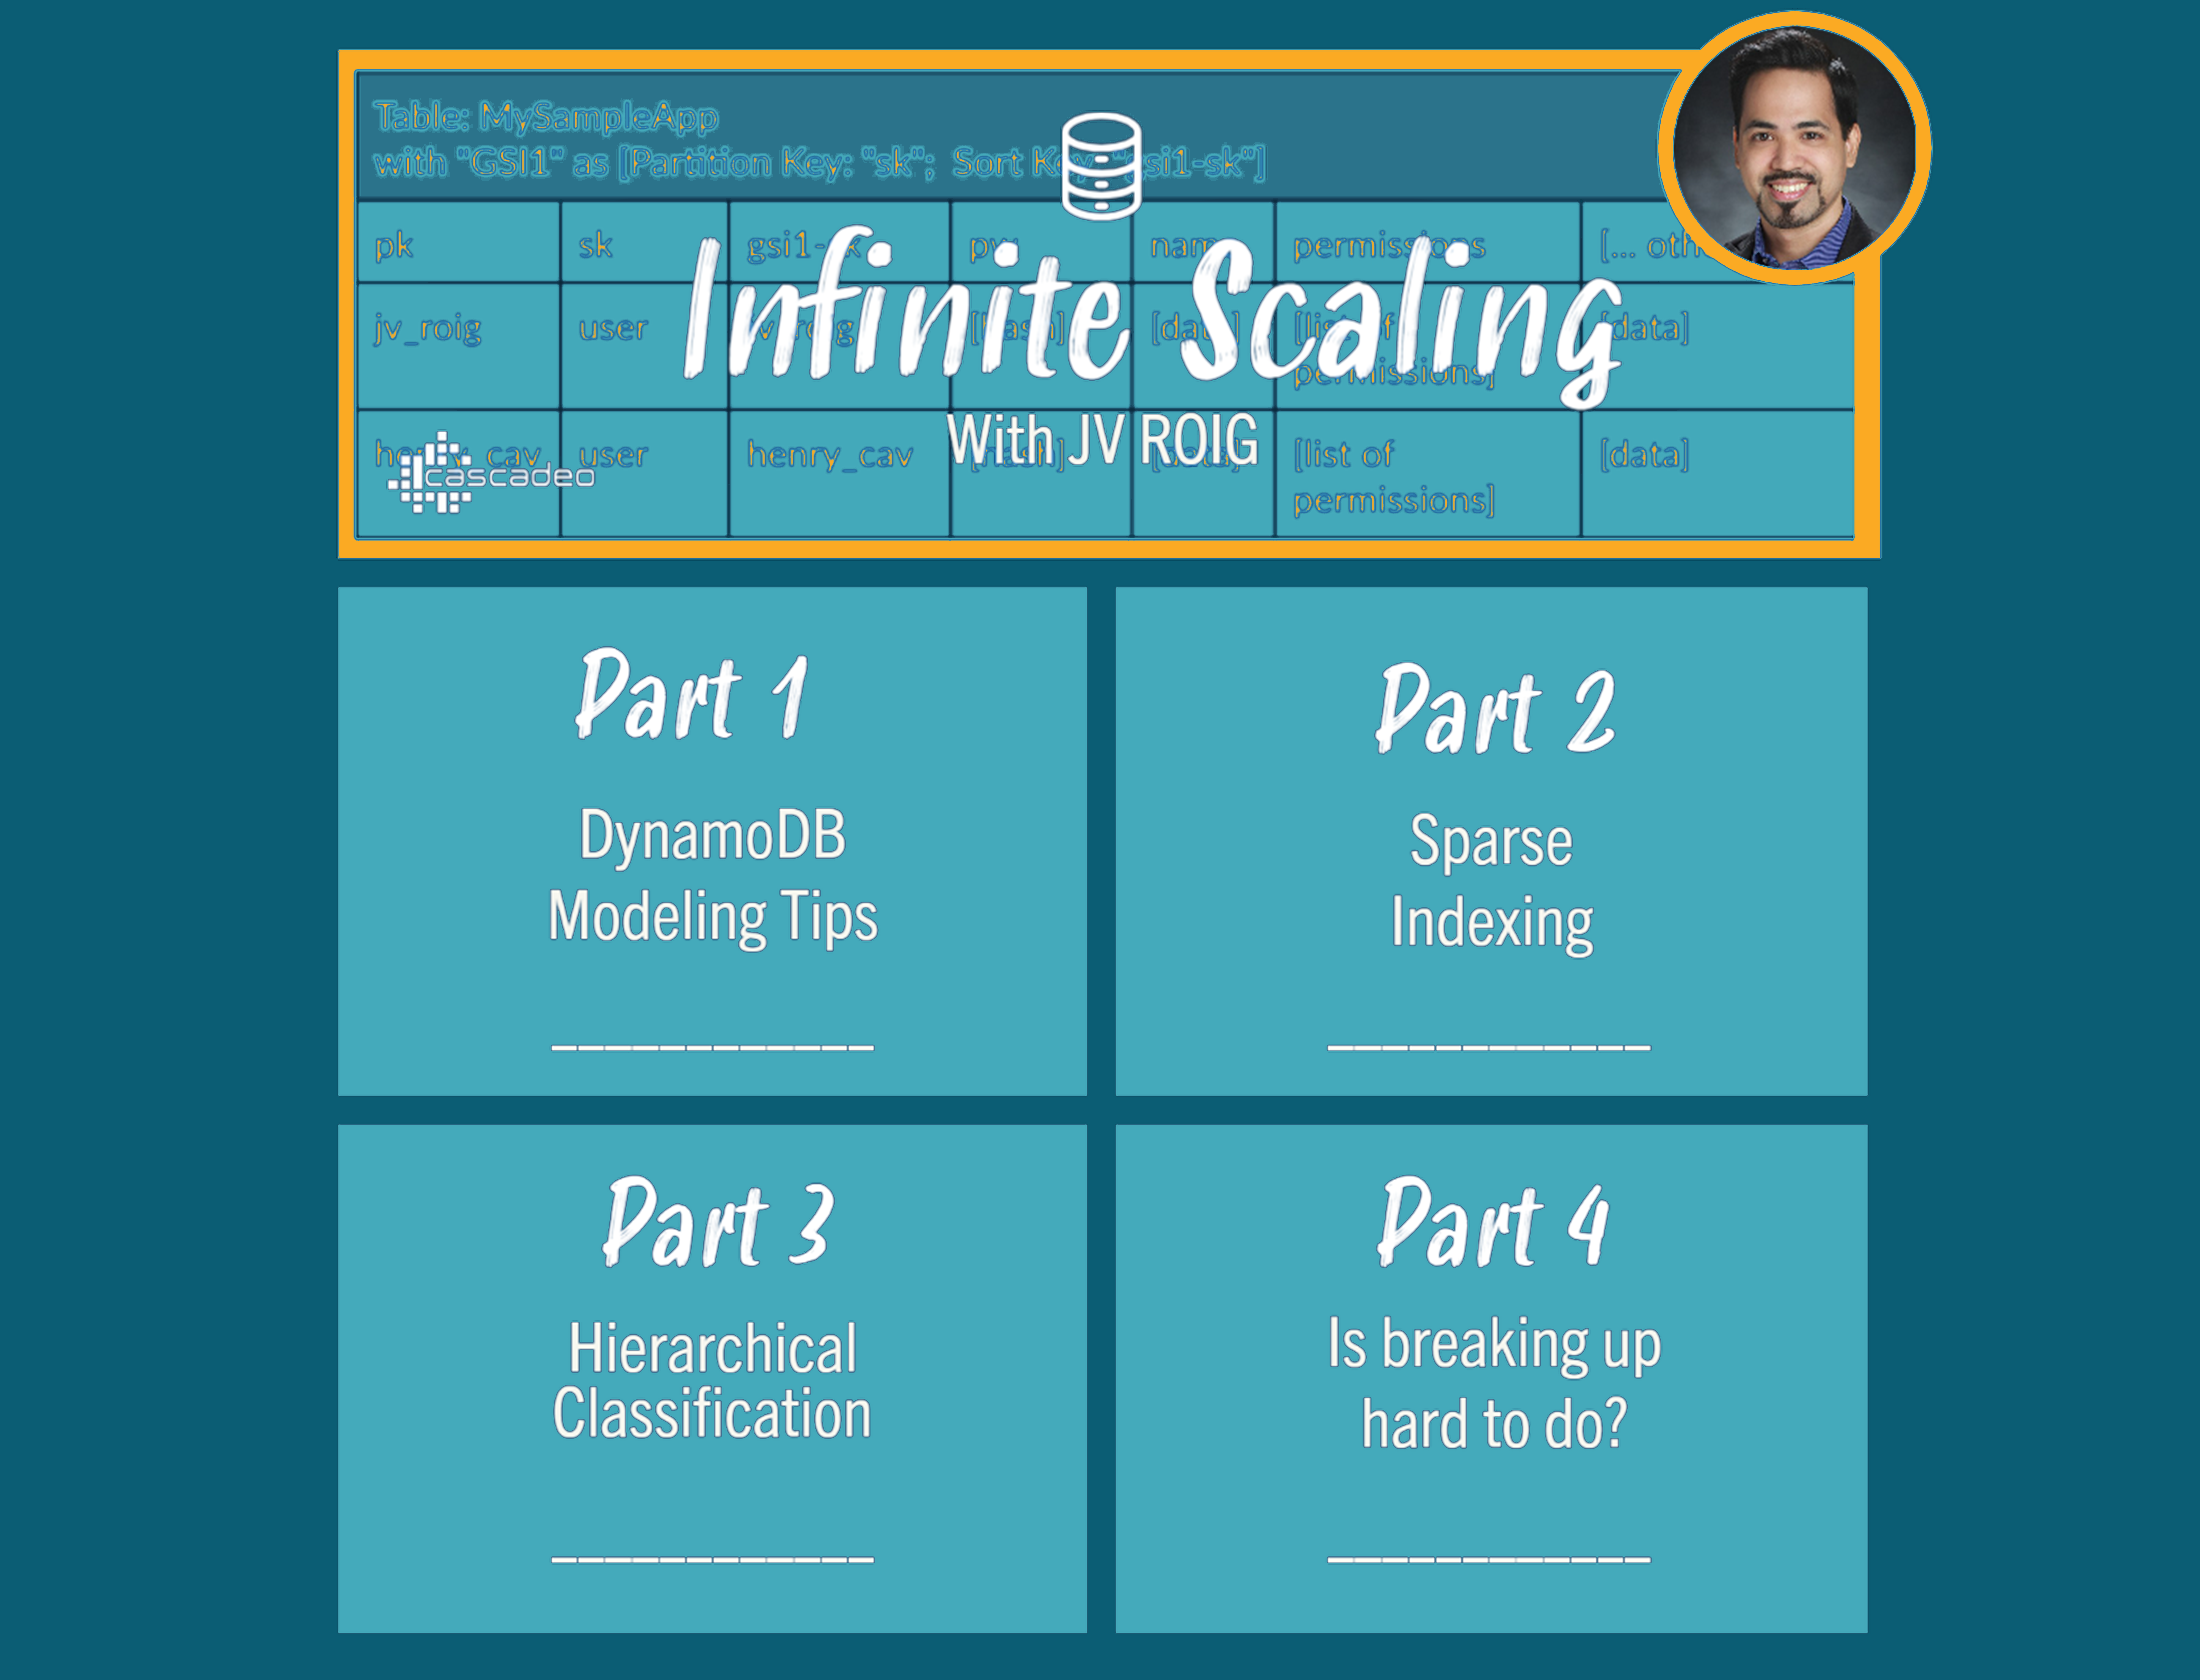 Infinite Scaling with JV Roig from the Cascadeo Blog